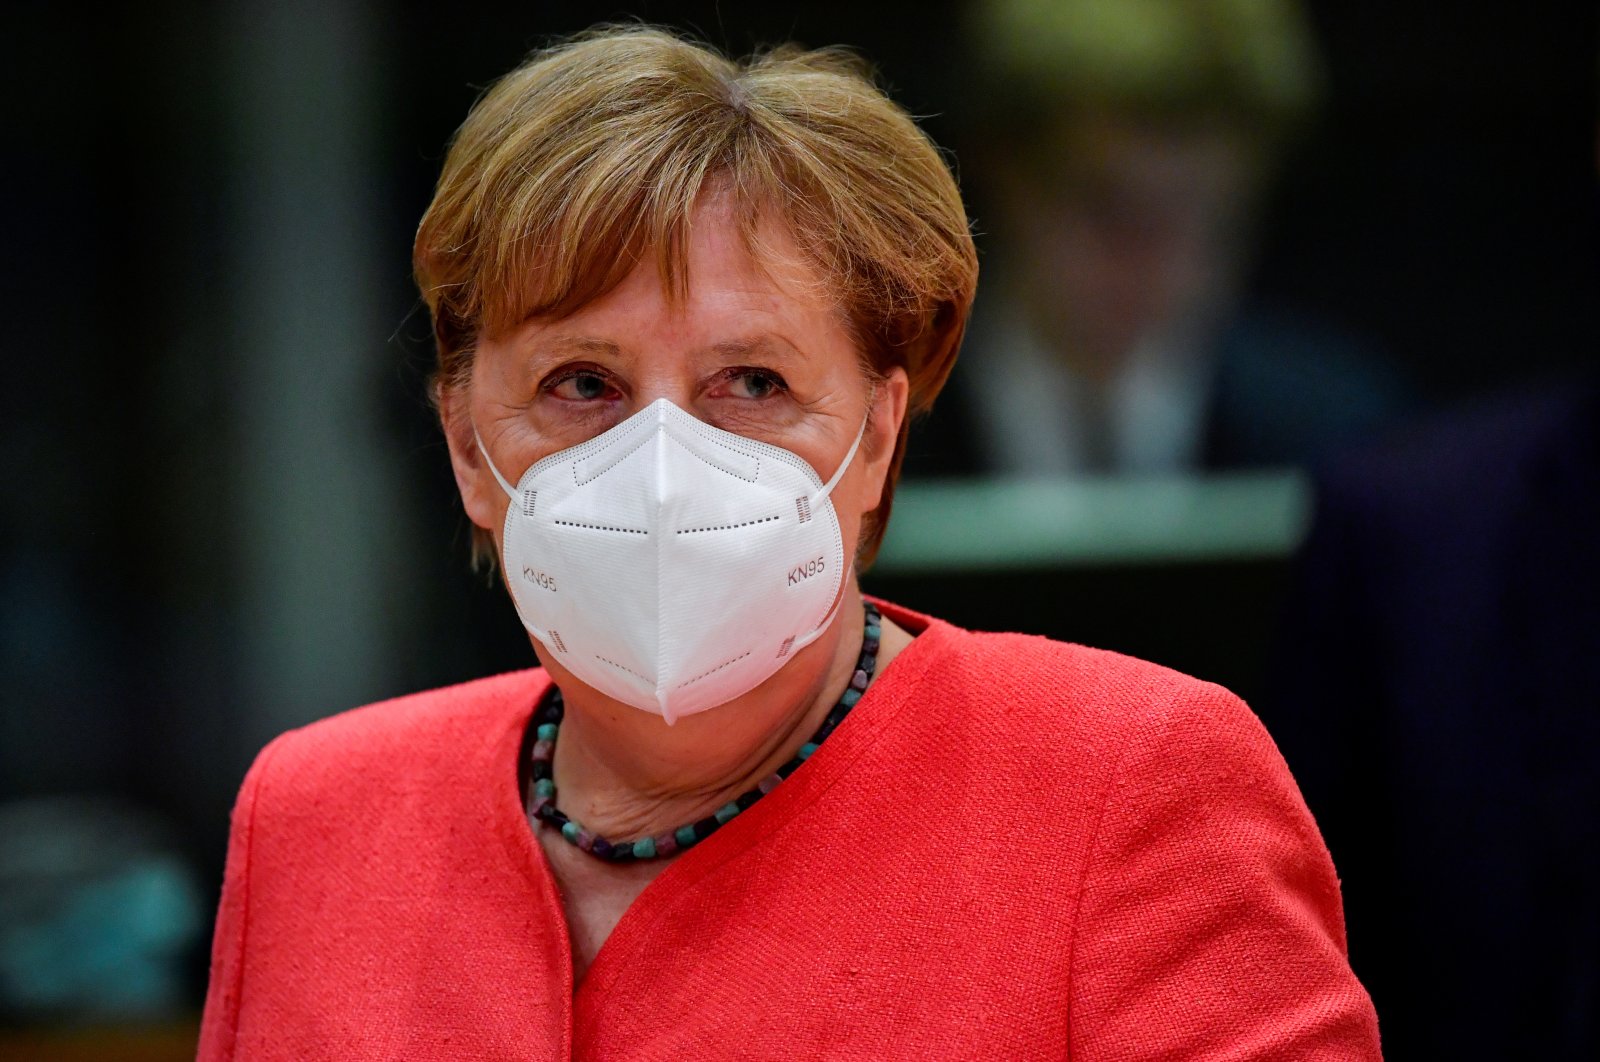 German Chancellor Angela Merkel looks on during the first face-to-face European Union summit since the coronavirus outbreak, in Brussels, Belgium, July 20, 2020. (Reuters Photo)